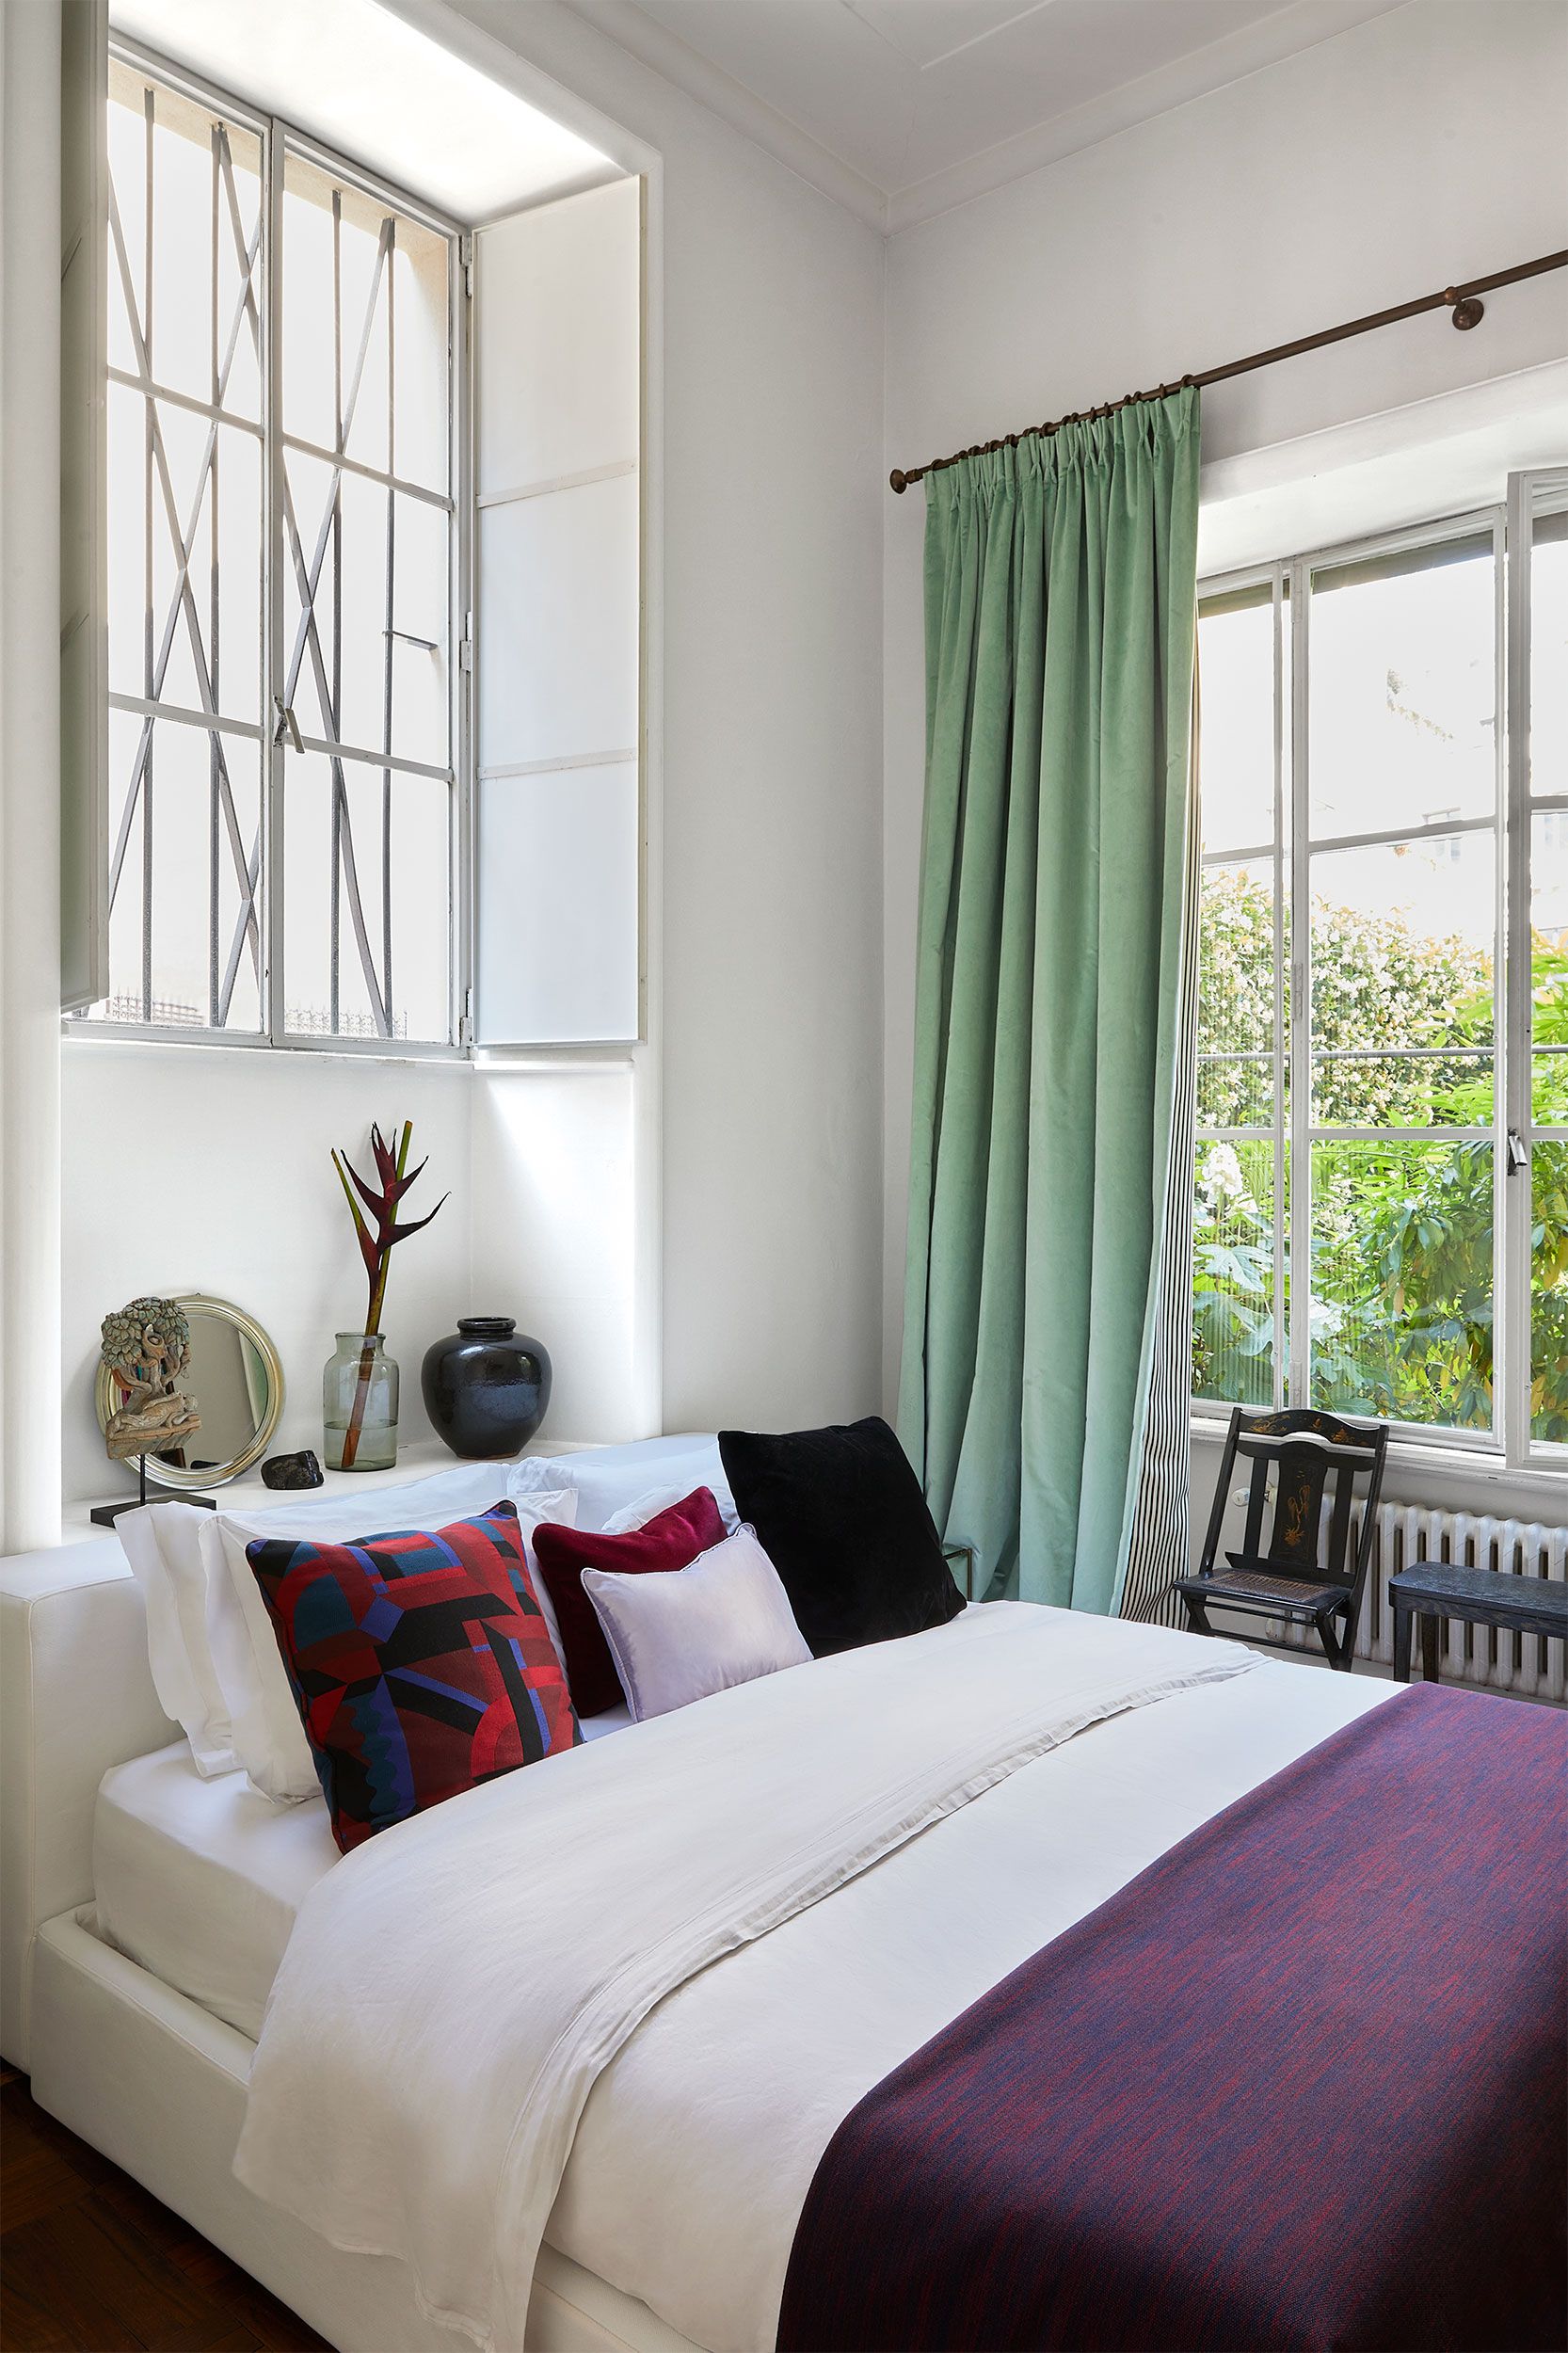 5 Ideas for Using Airy Linen Draperies in Your Home